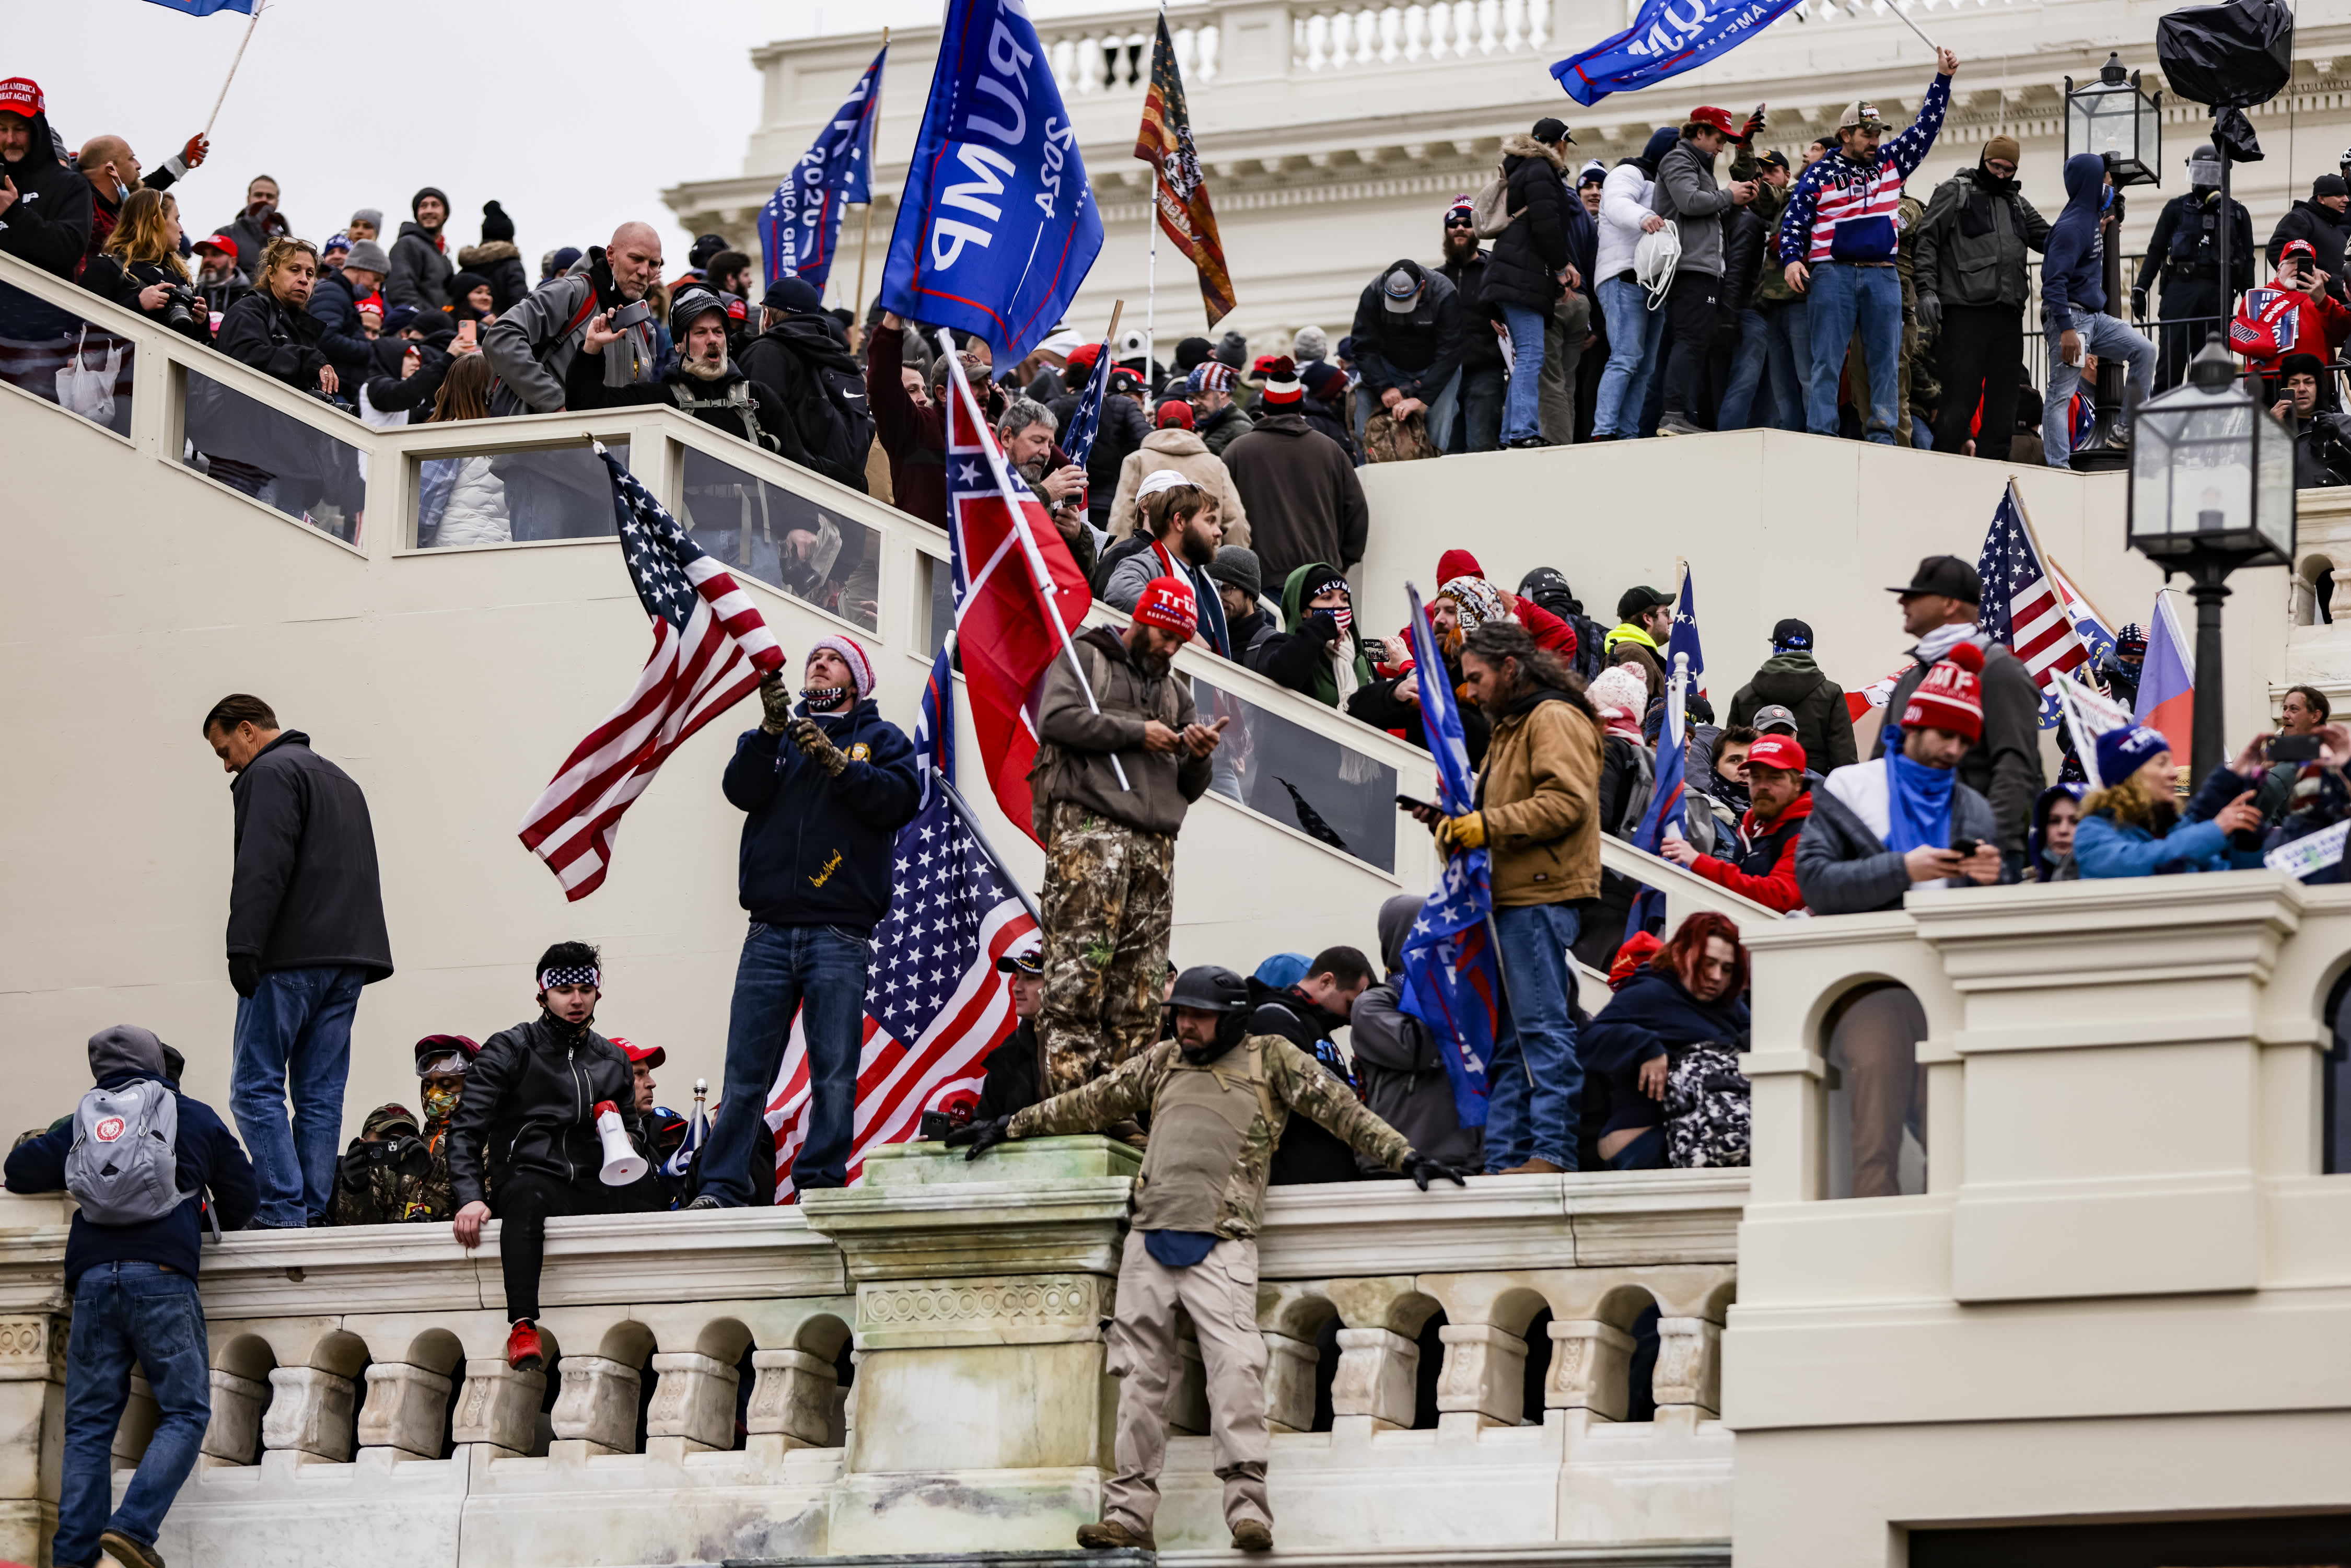 Photos show violent clashes as Trump supporters storm the U.S. Capitol